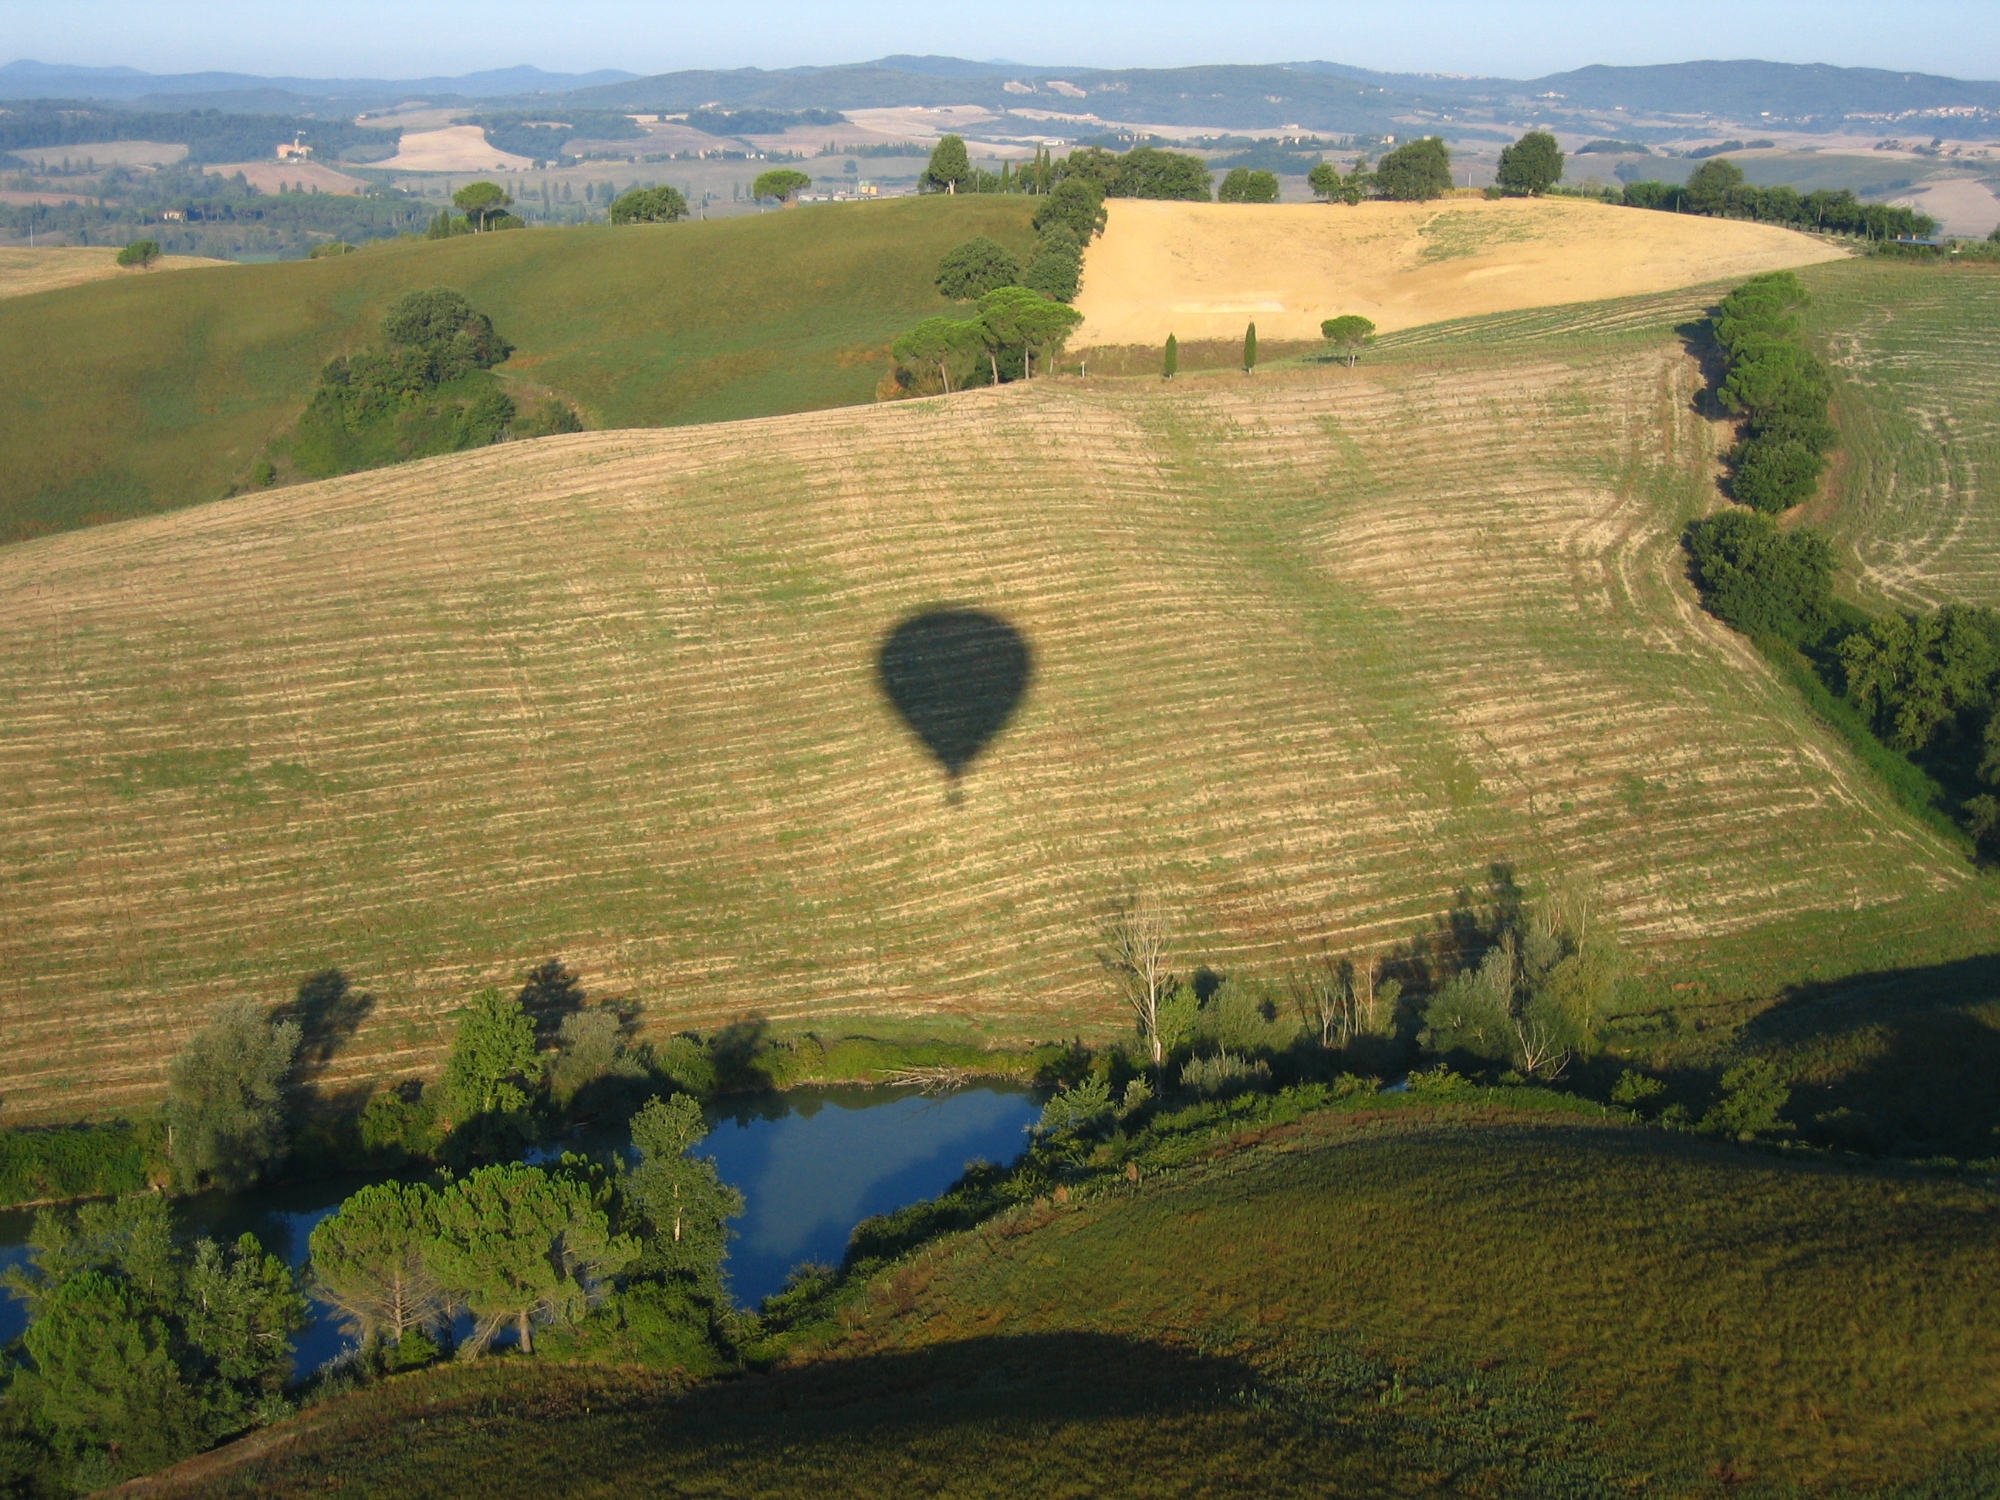 Flying over Buonconvento